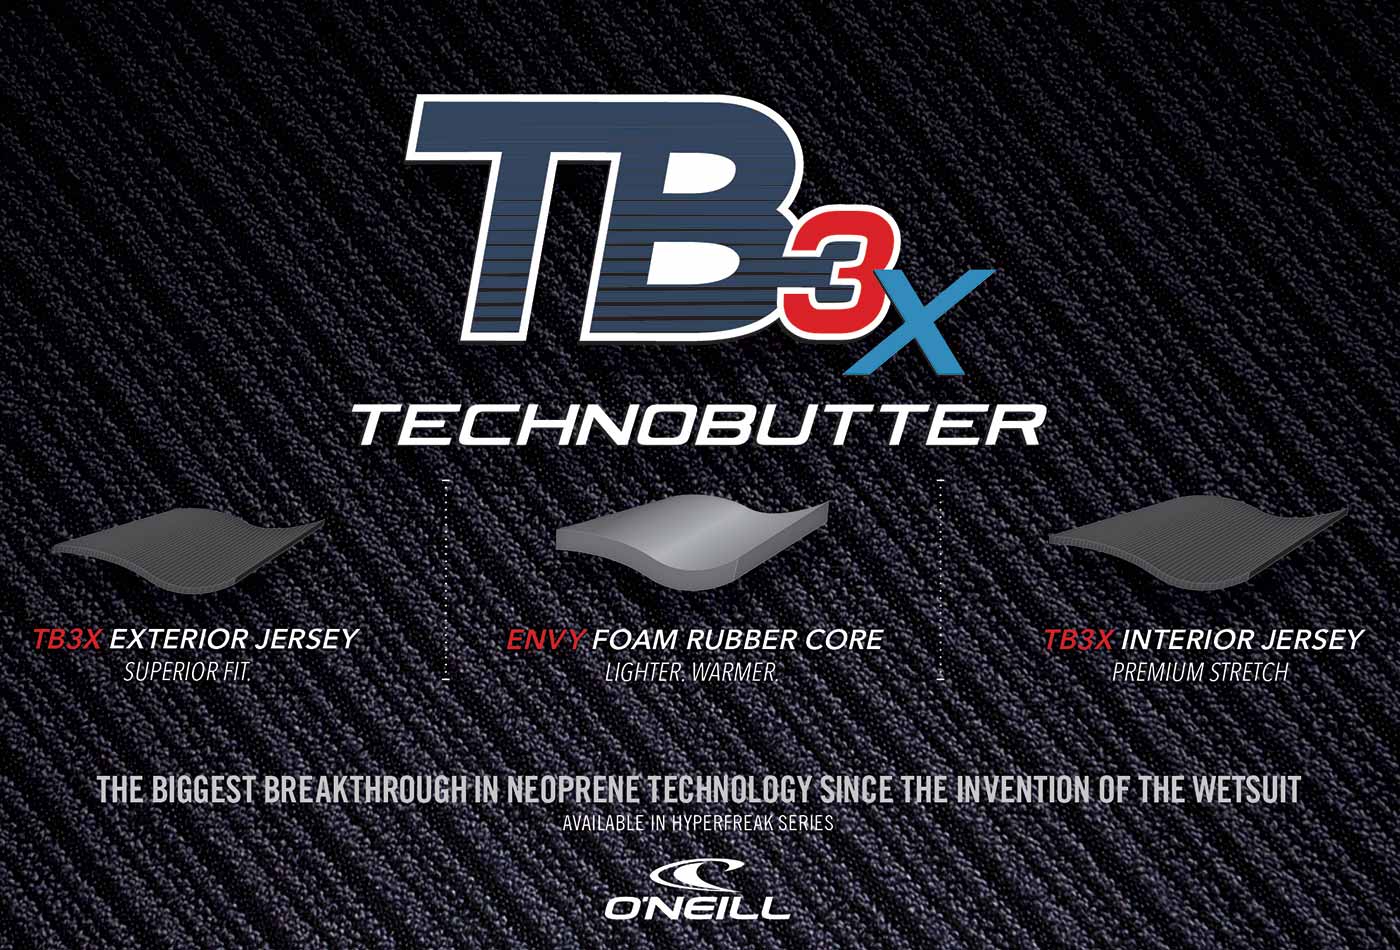 TB3X is “pre-stretched” to maintain it’s structure for premium, weightless flexibility. TB3X increases warmth with a low profile that sheds water and dries faster.